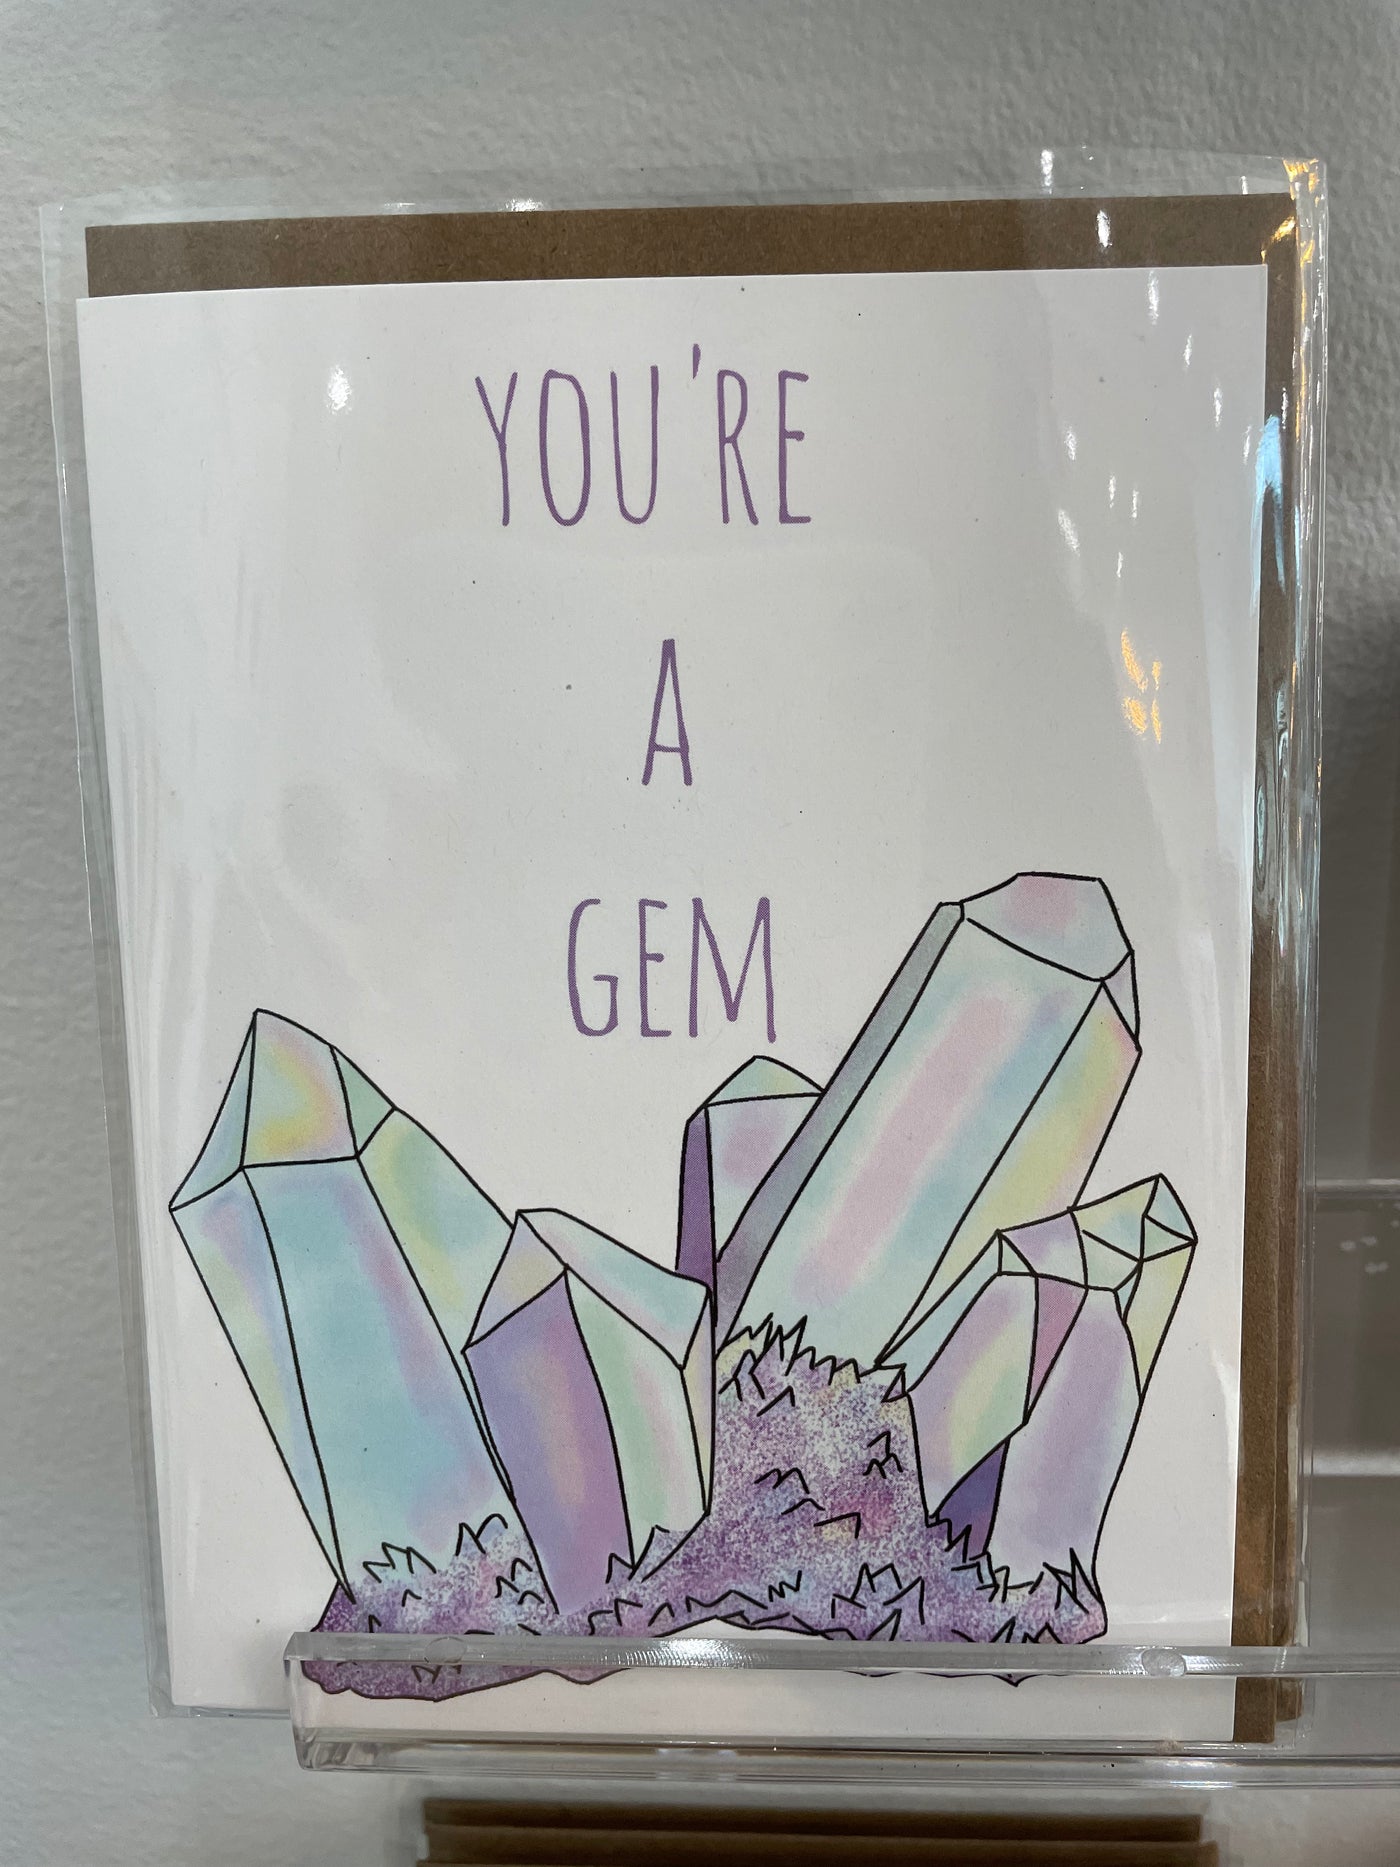 Woman owned business card, you're a gem, gratitude card for friend